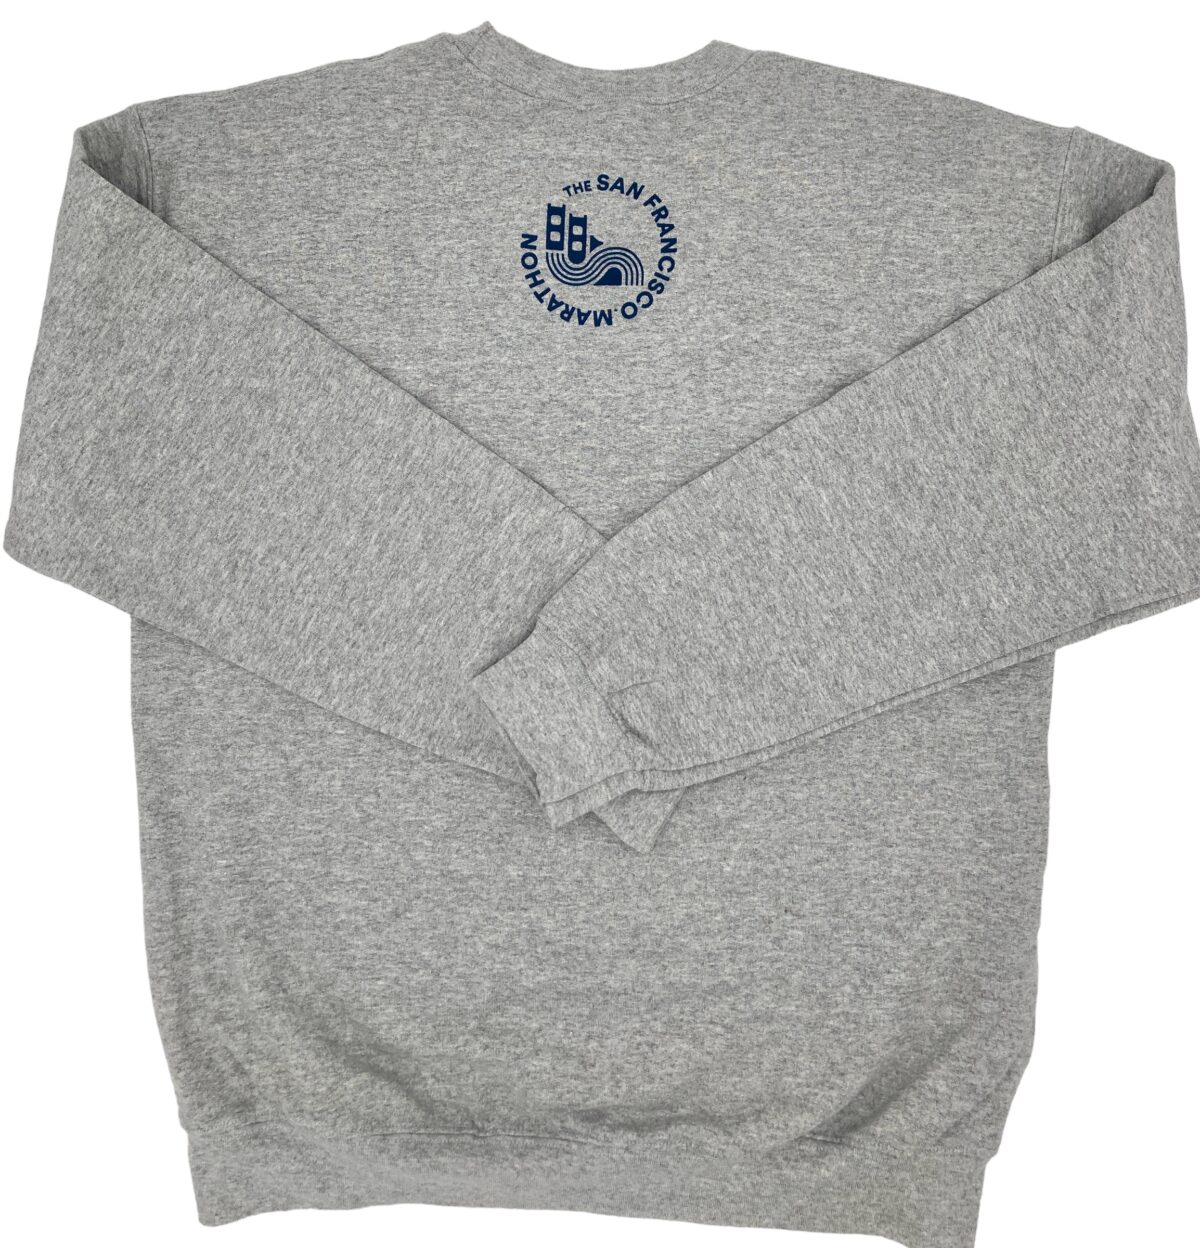 Back detail of the crewneck sweatshirt showing the San Francisco Marathon logo in navy blue at the top, centered just under the collar